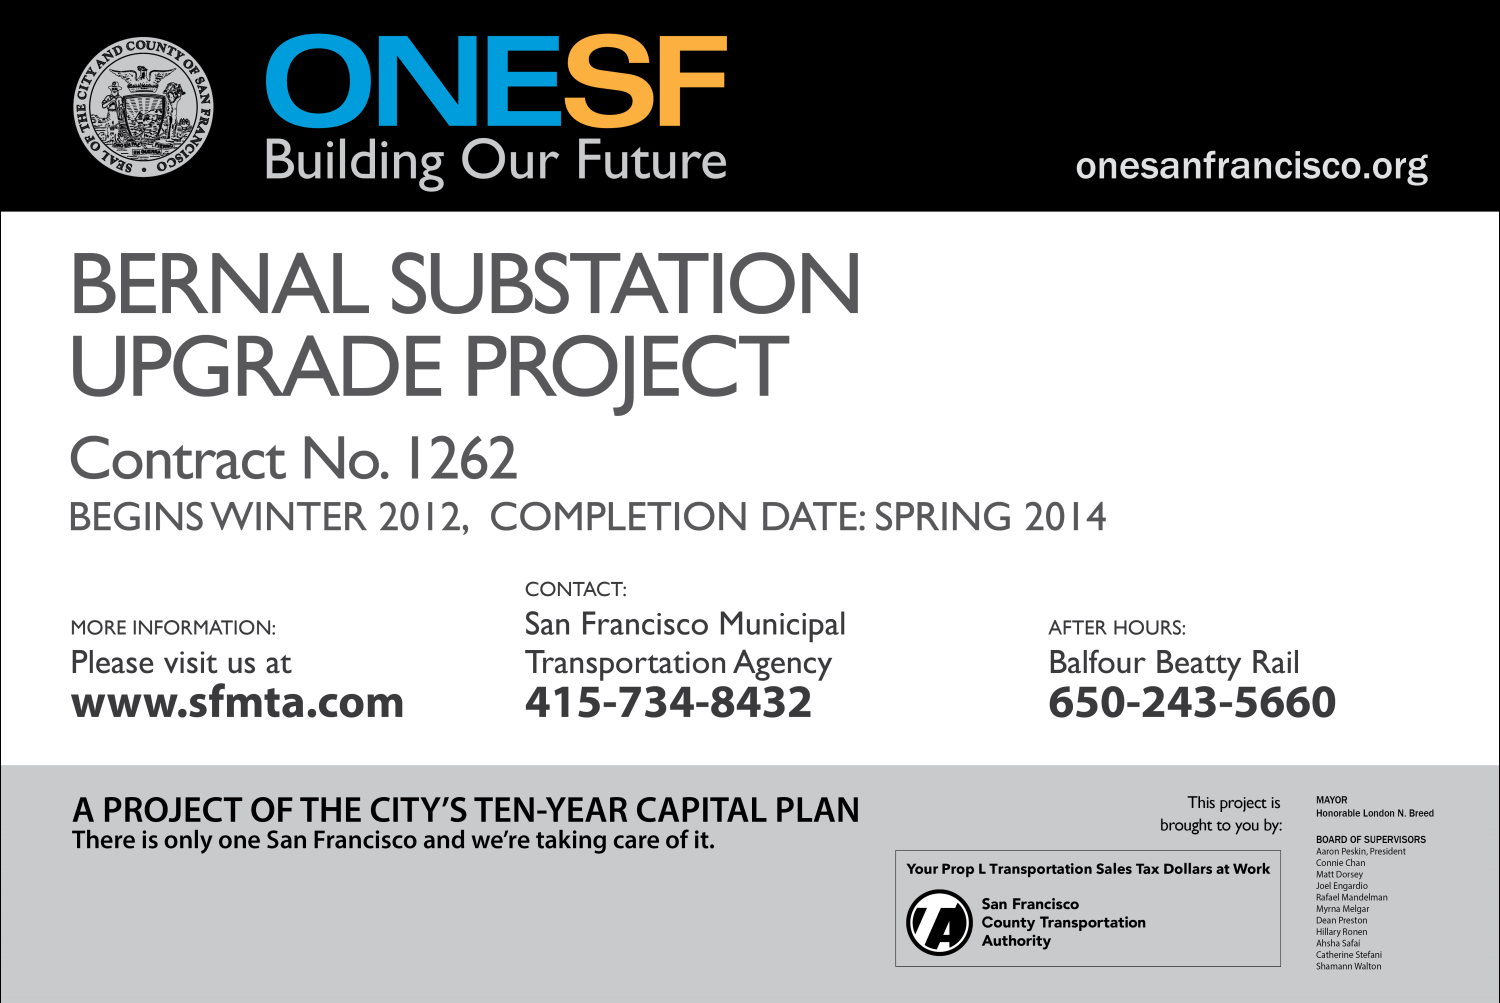 The OneSF construction sign, modified to include proper attribution for Prop L